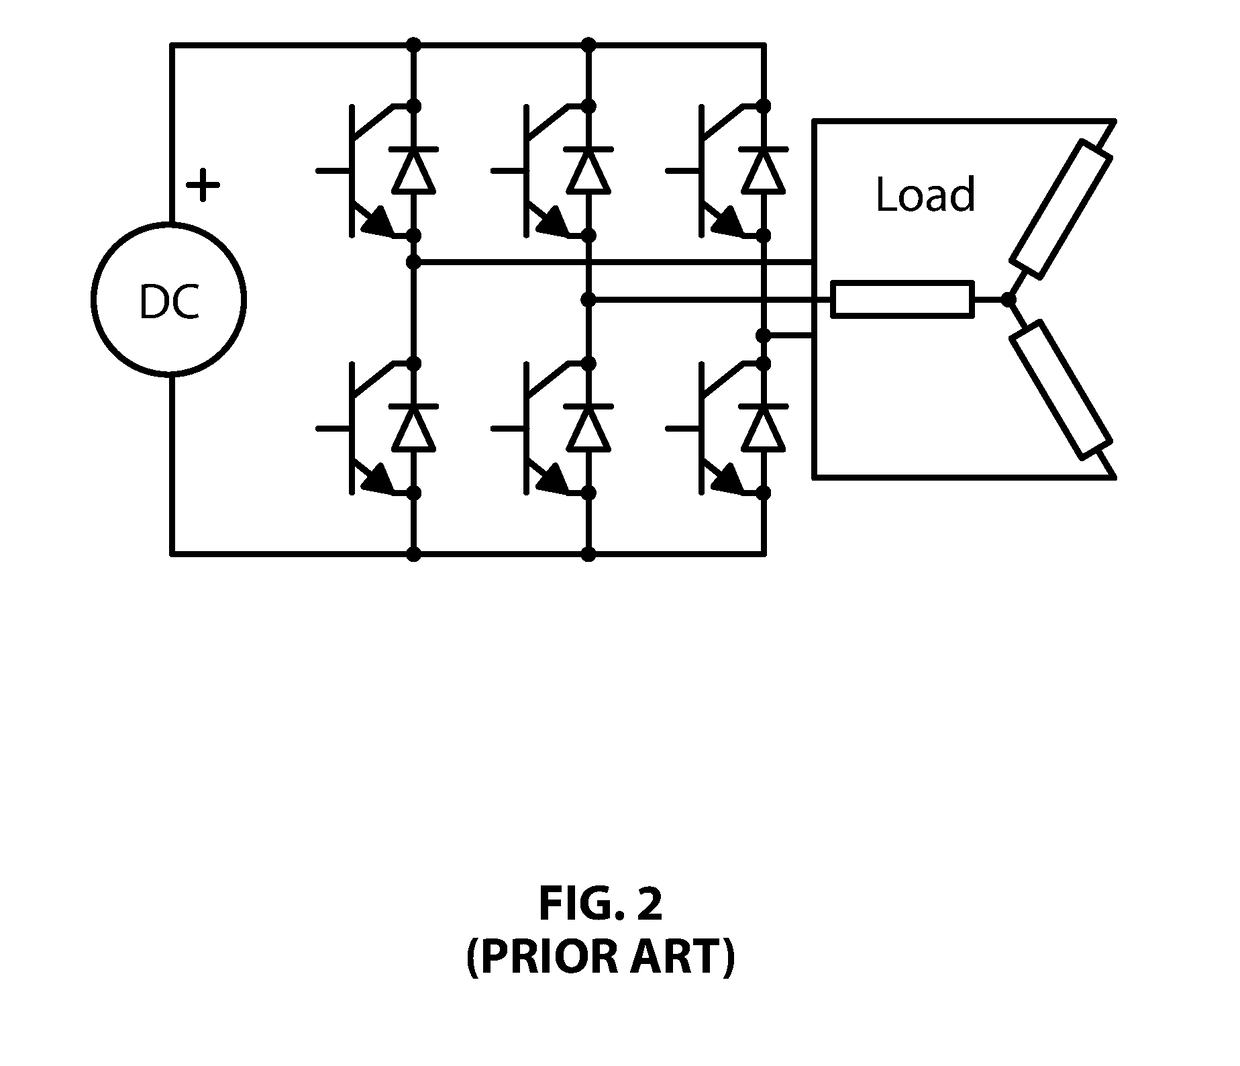 Systems and methods for shunt power factor correction